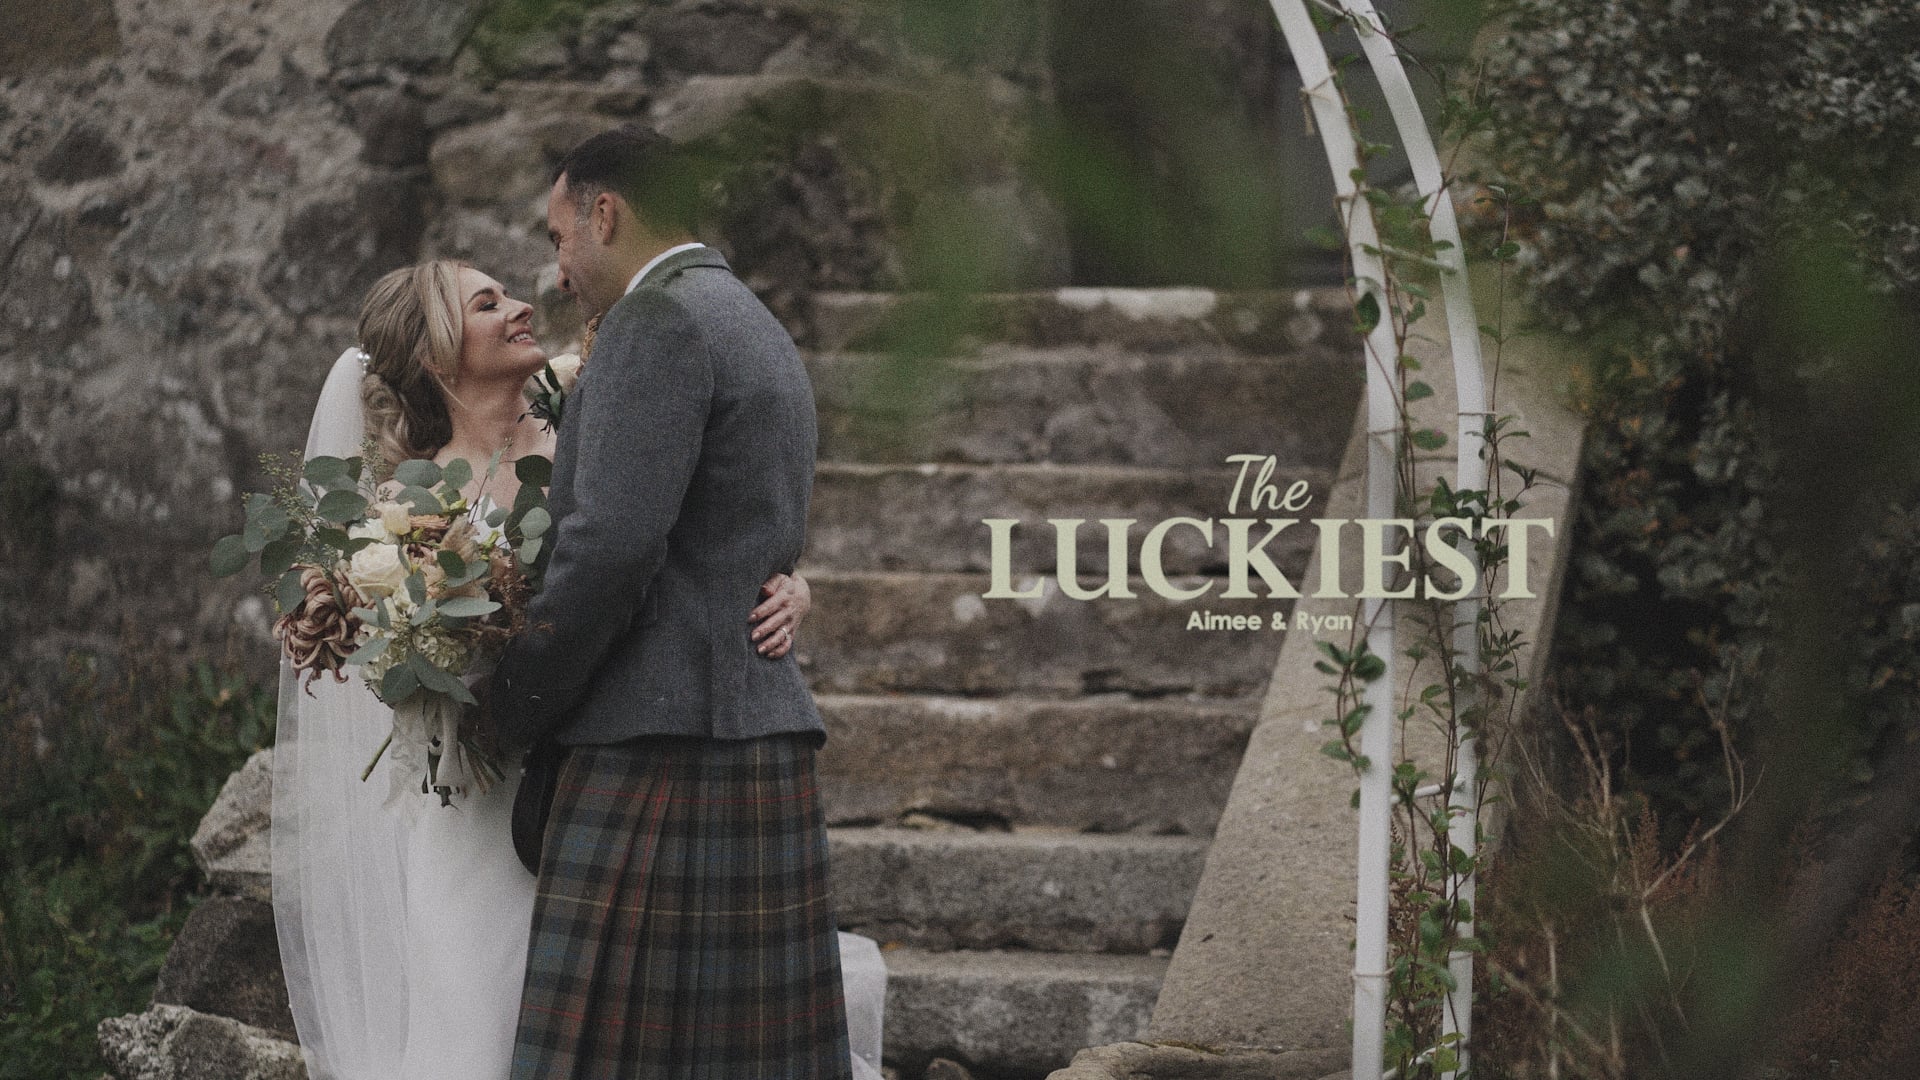 The Luckiest by Aimee and Ryan